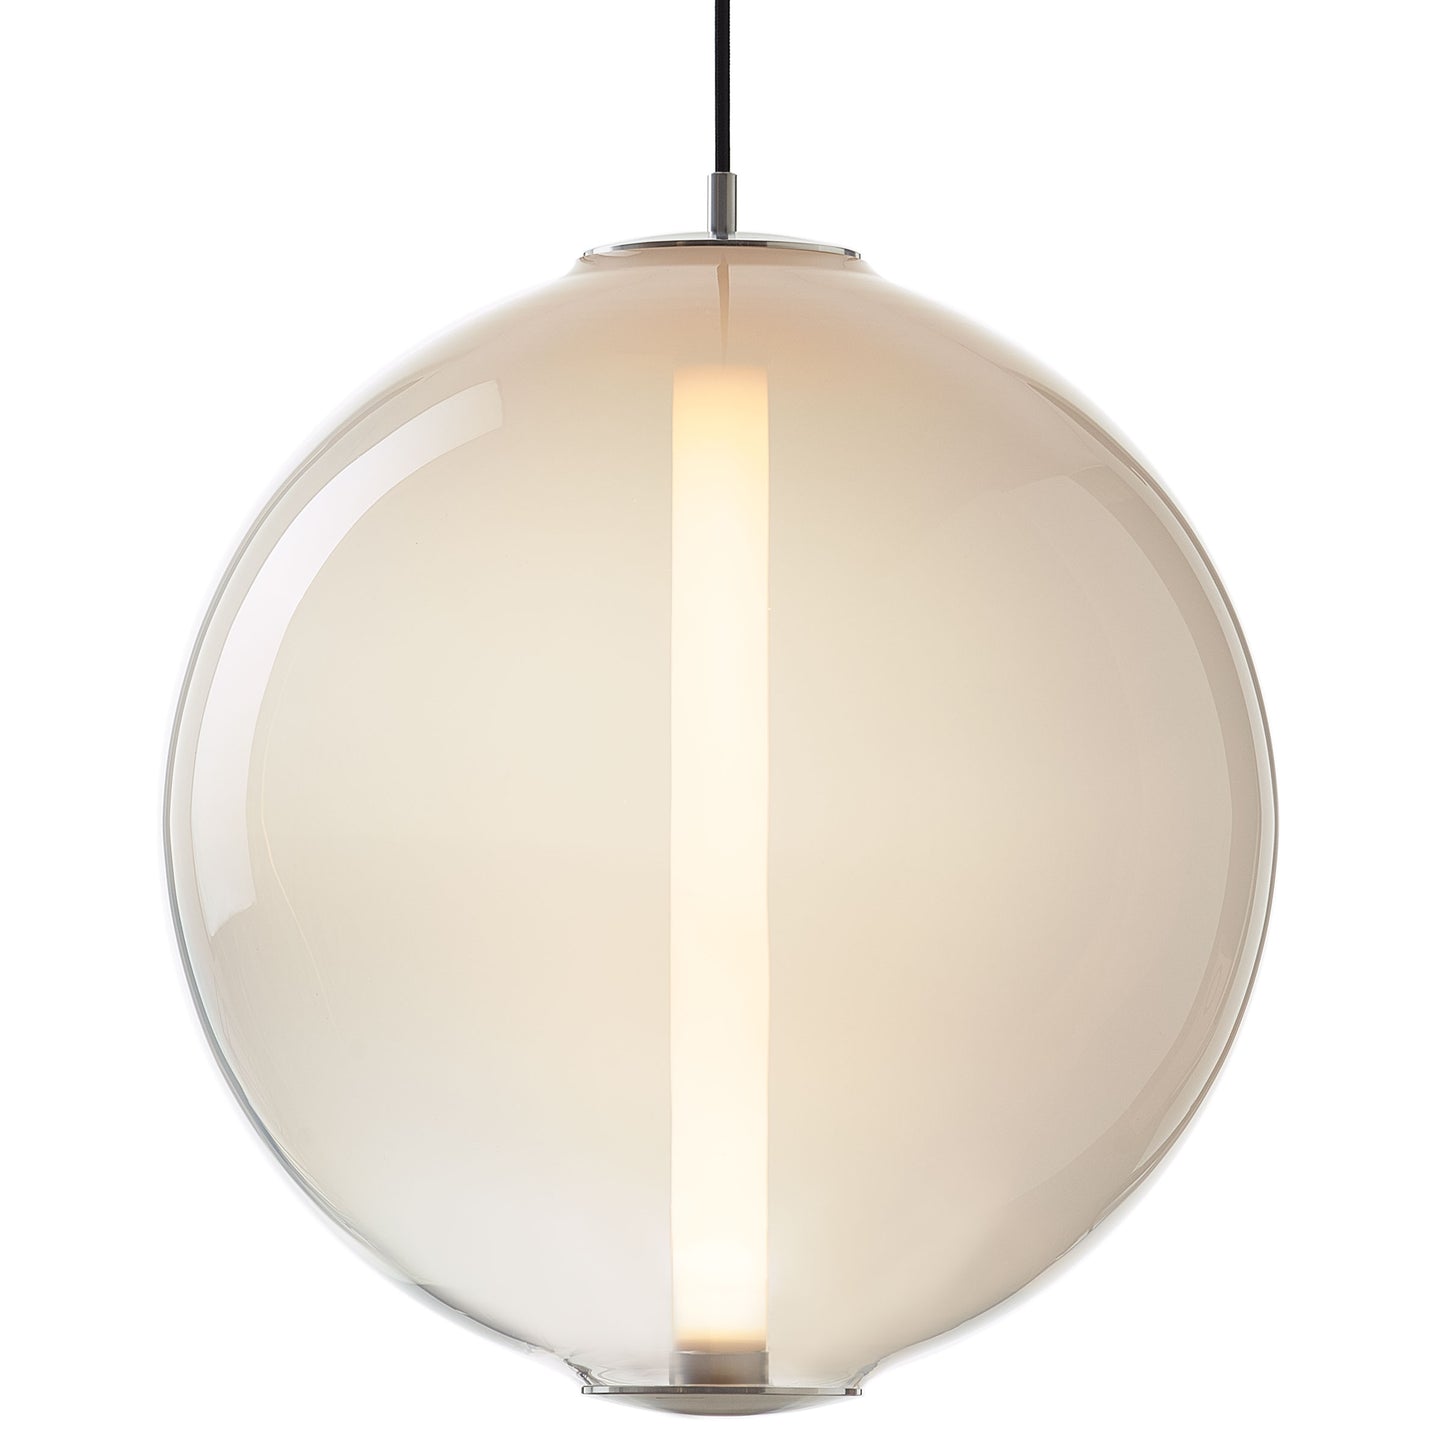 BOMMA - BUOY PENDANT SPHERE - from $4,178.00